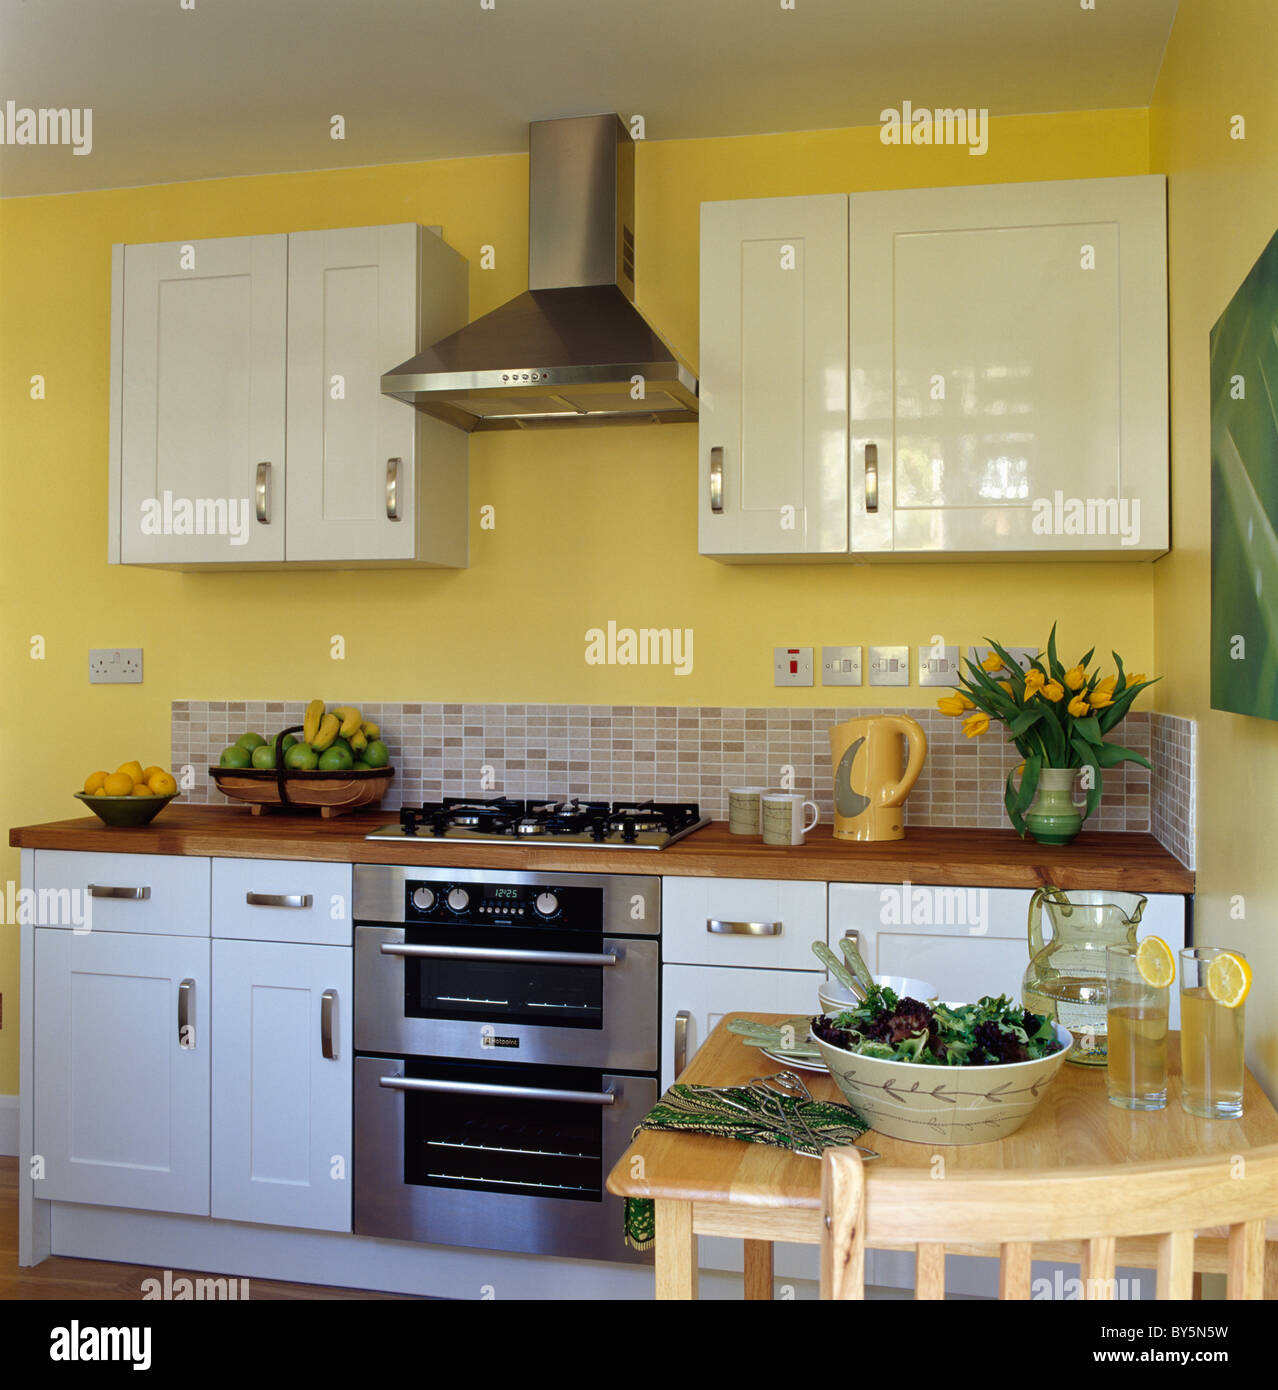 Stainless Steel Extractor Above Oven In Modernb Yellow Kitchen